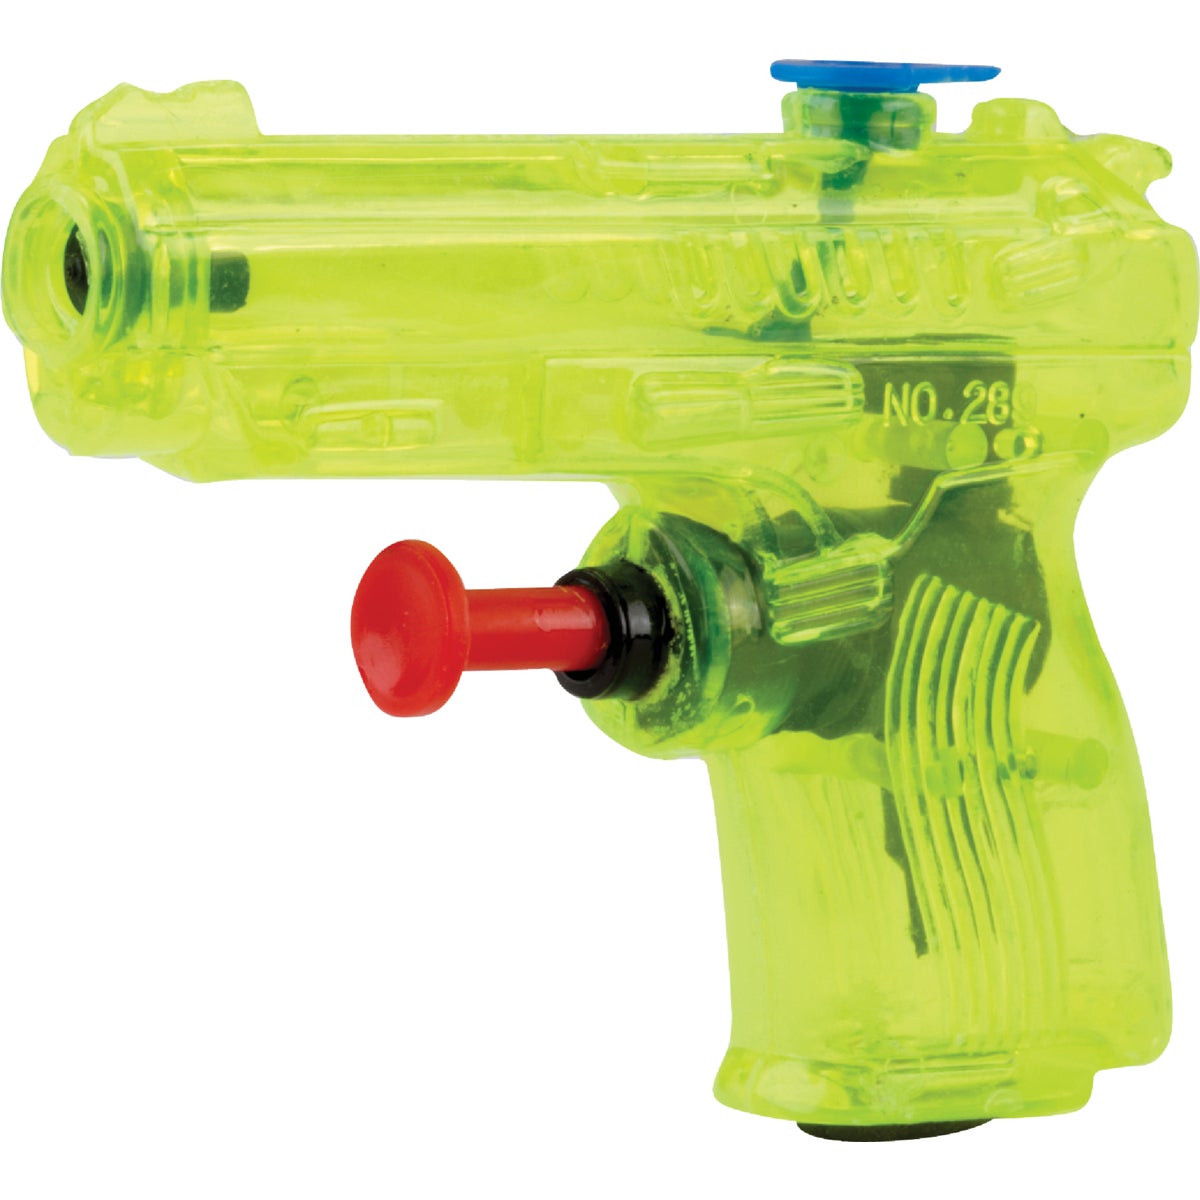 Item 820288, Affordable multiple shot water gun is sure to be a hit with young and older